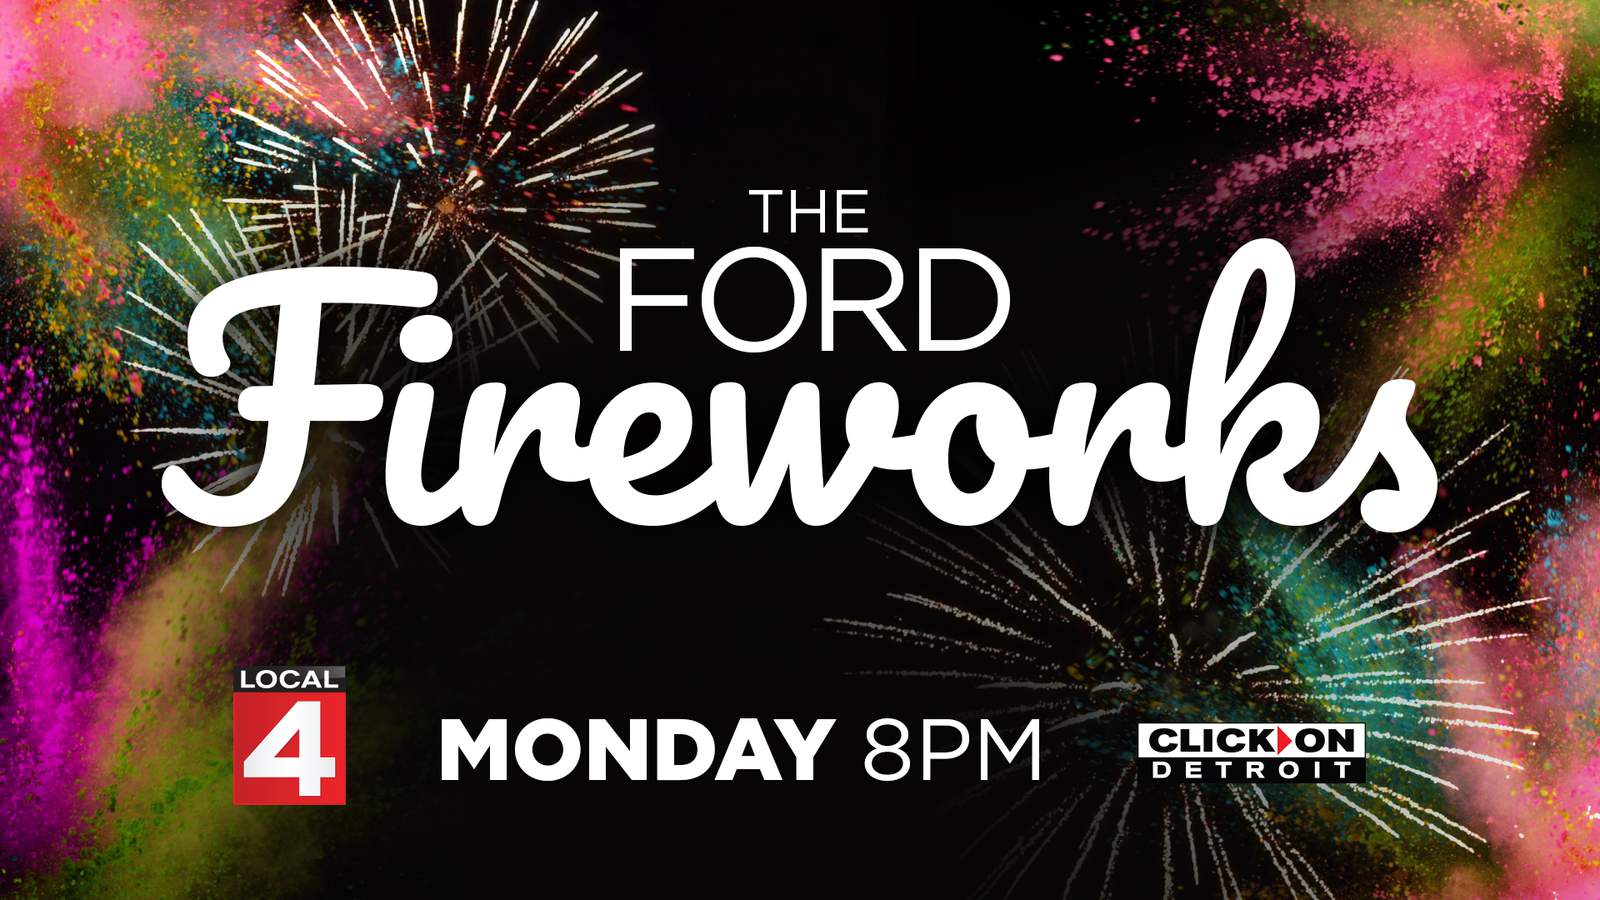 A very different Ford Fireworks display takes place Monday